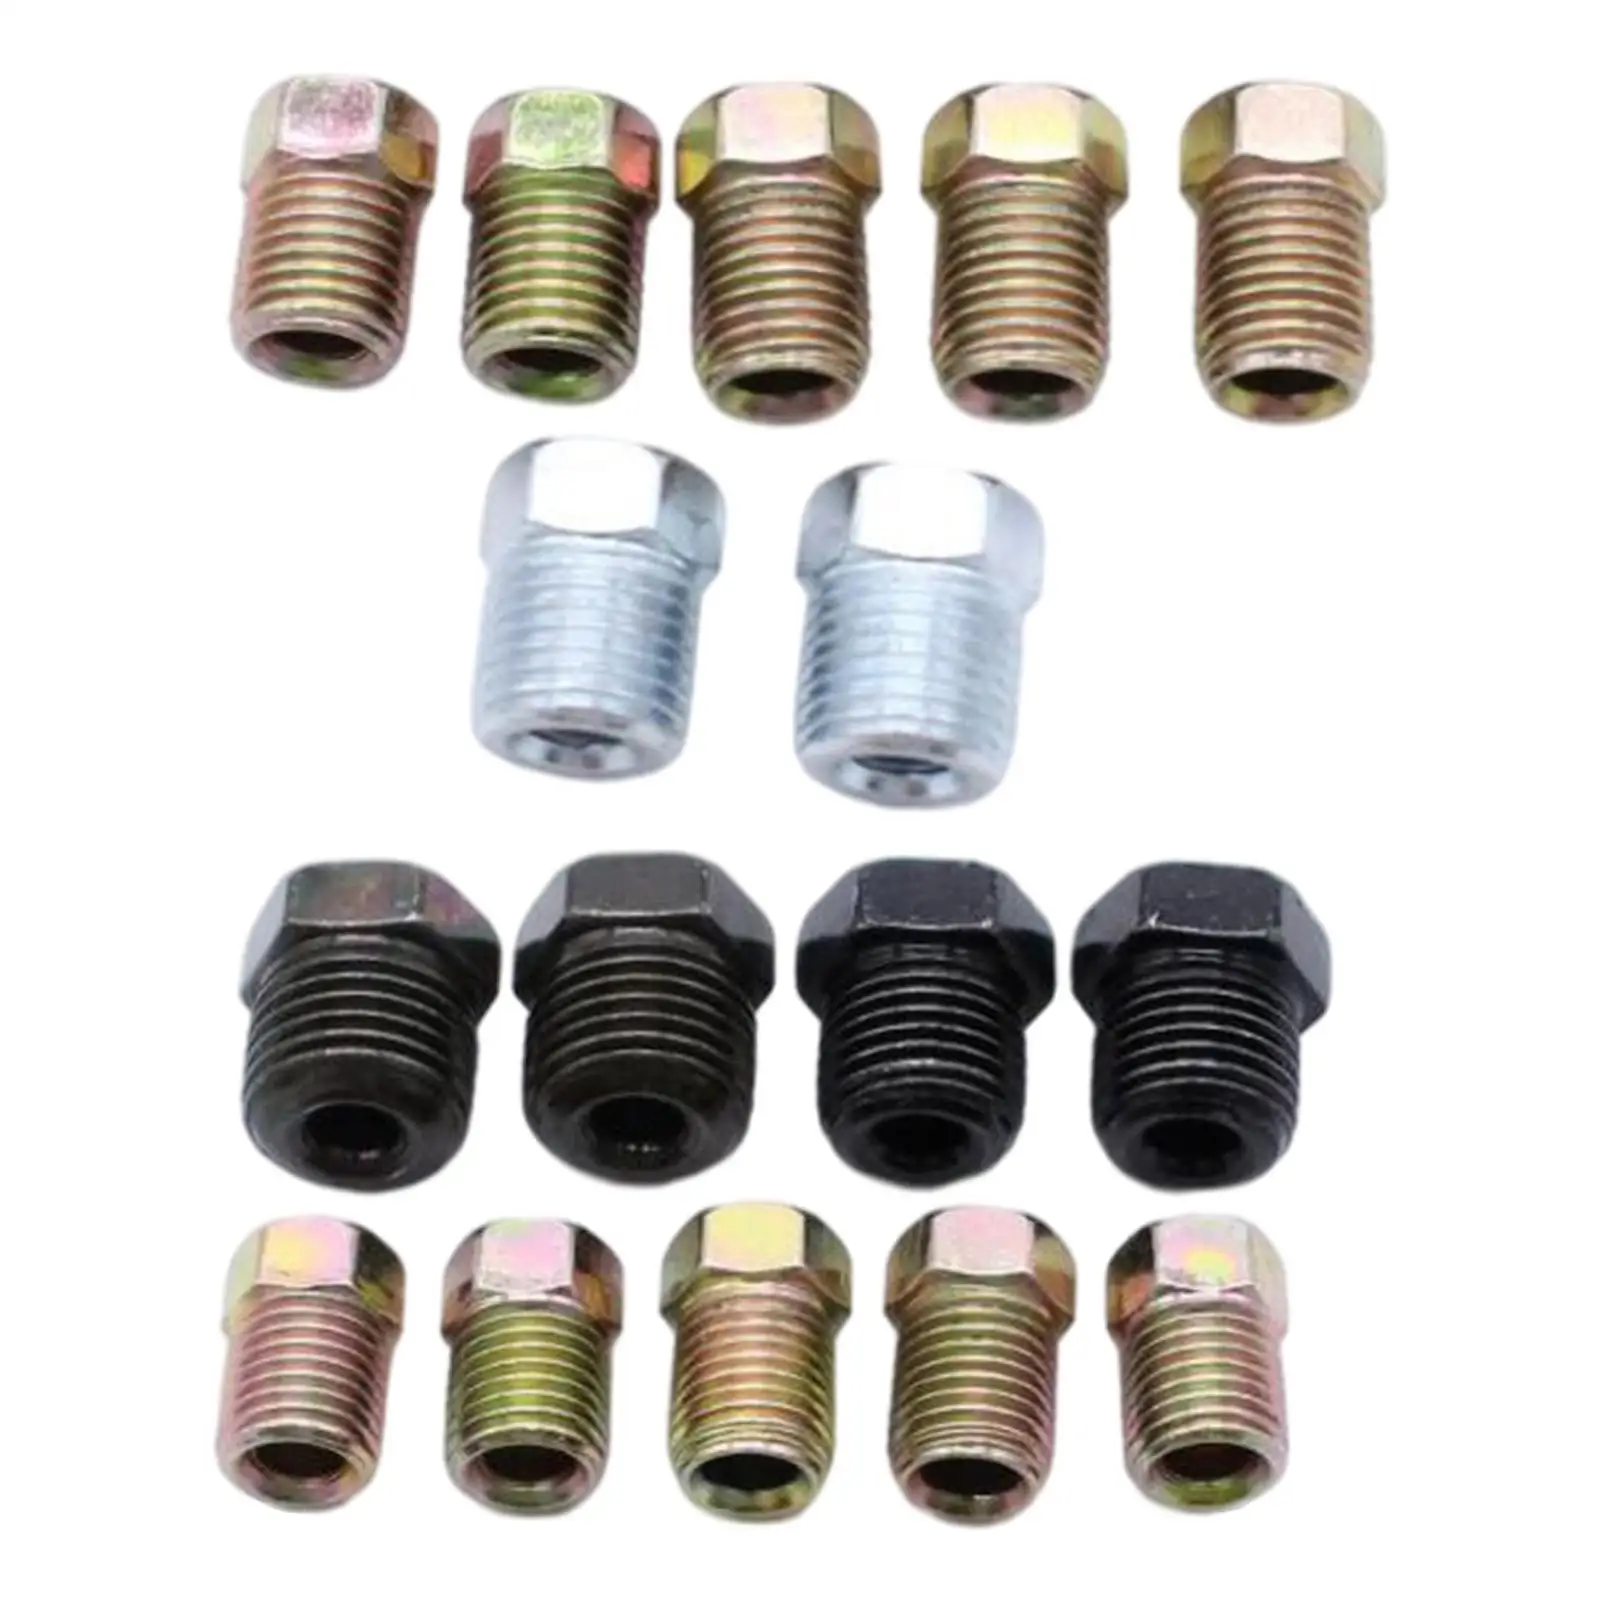 16-Pack Inverted Tube Nuts Assortment Fit for 3/16” Tube Replacement